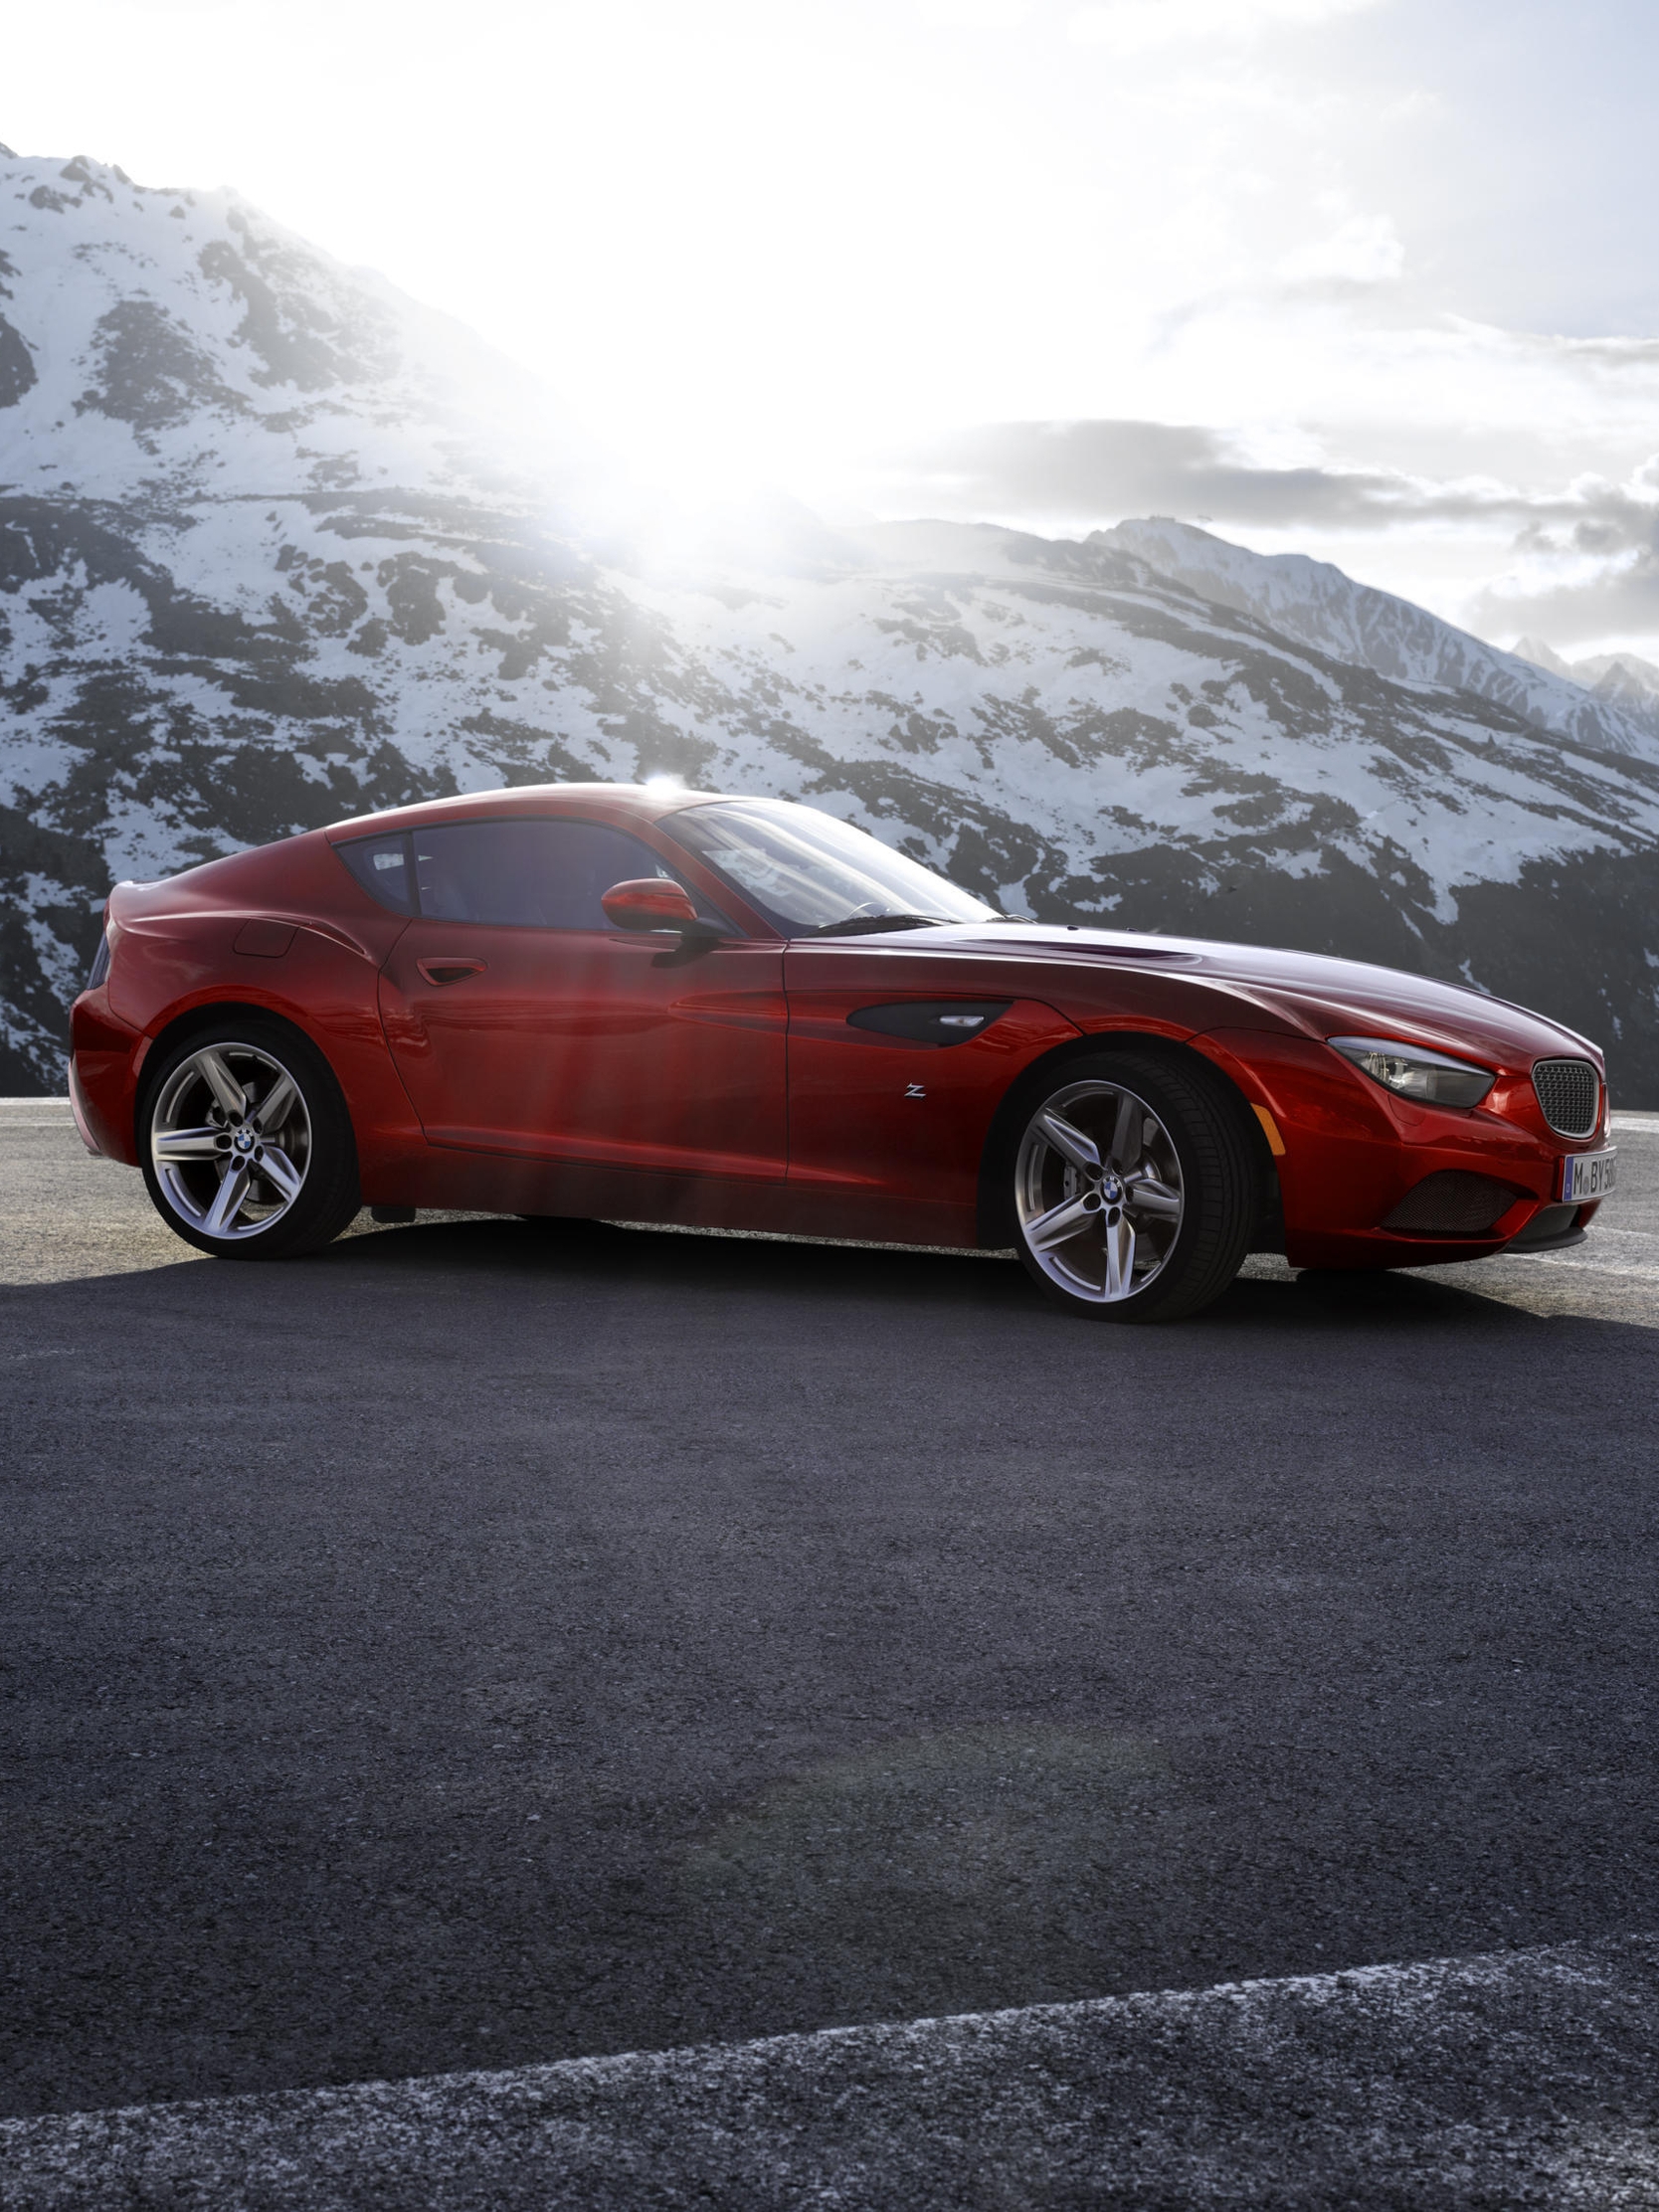 Image: BMW, Zagato, Coupe, red, standing, sun, mountains, clouds, snow